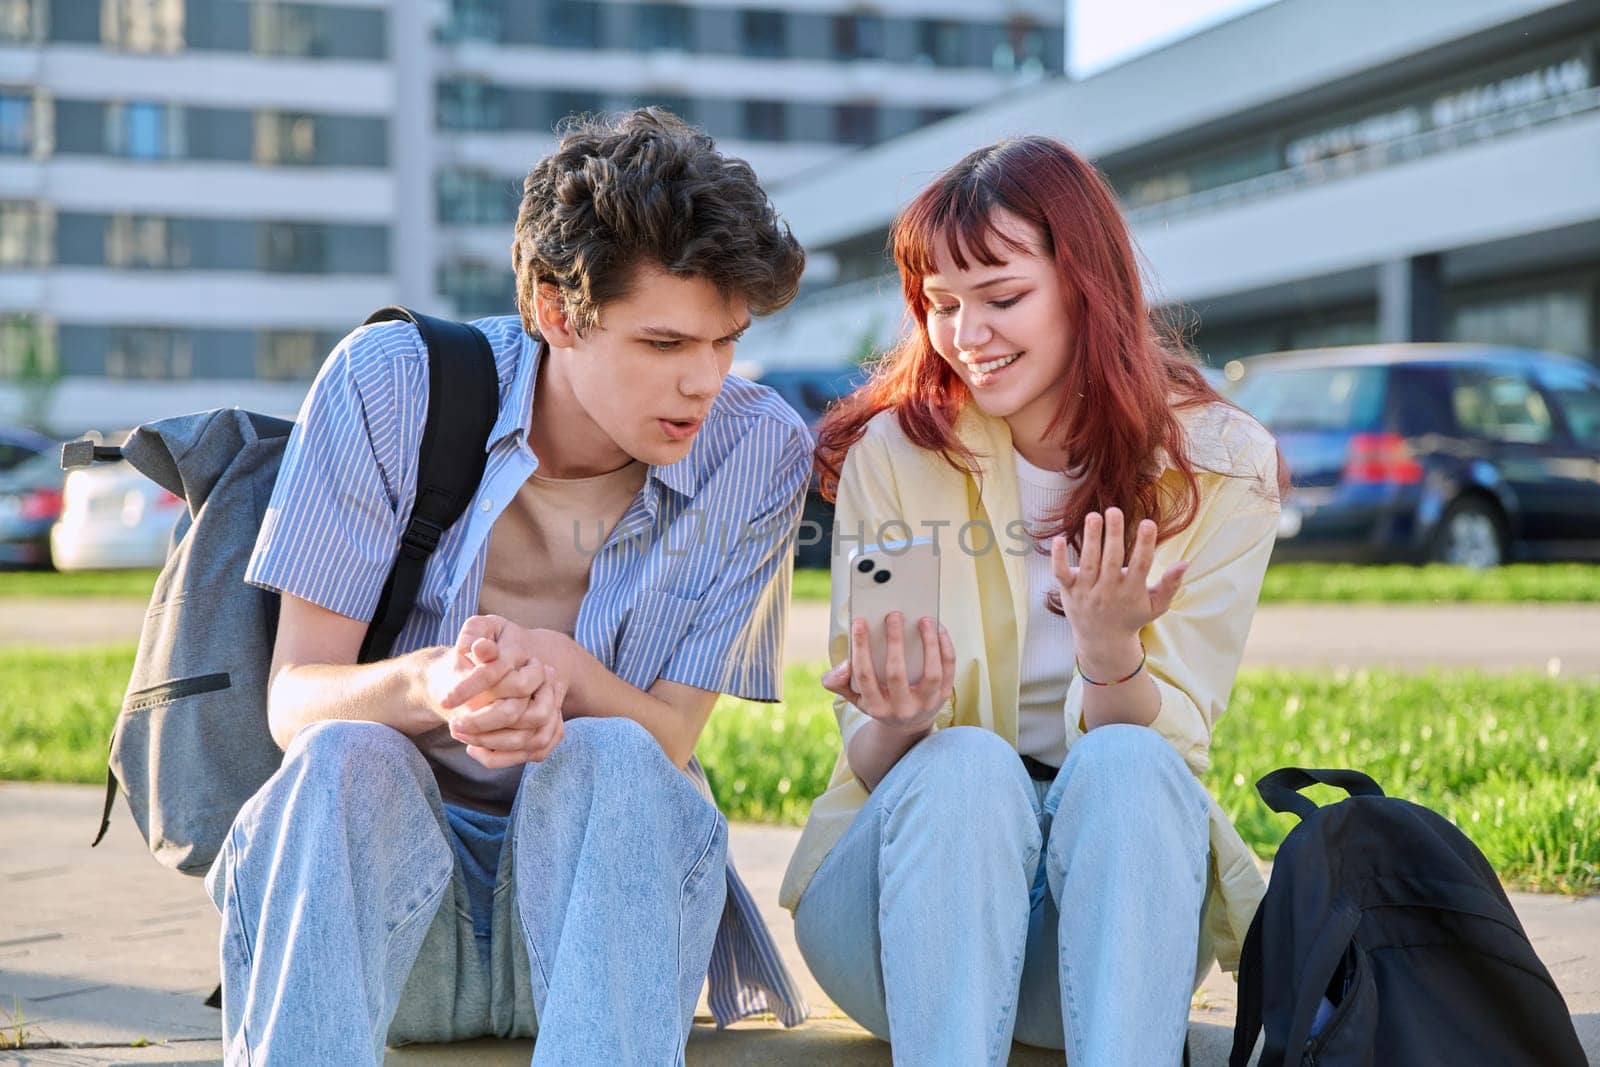 Friends young guy and girl university college students talking together, looking at smartphone outdoor, city modern buildings background. Lifestyle, communication, youth 19-20 years old, urban style